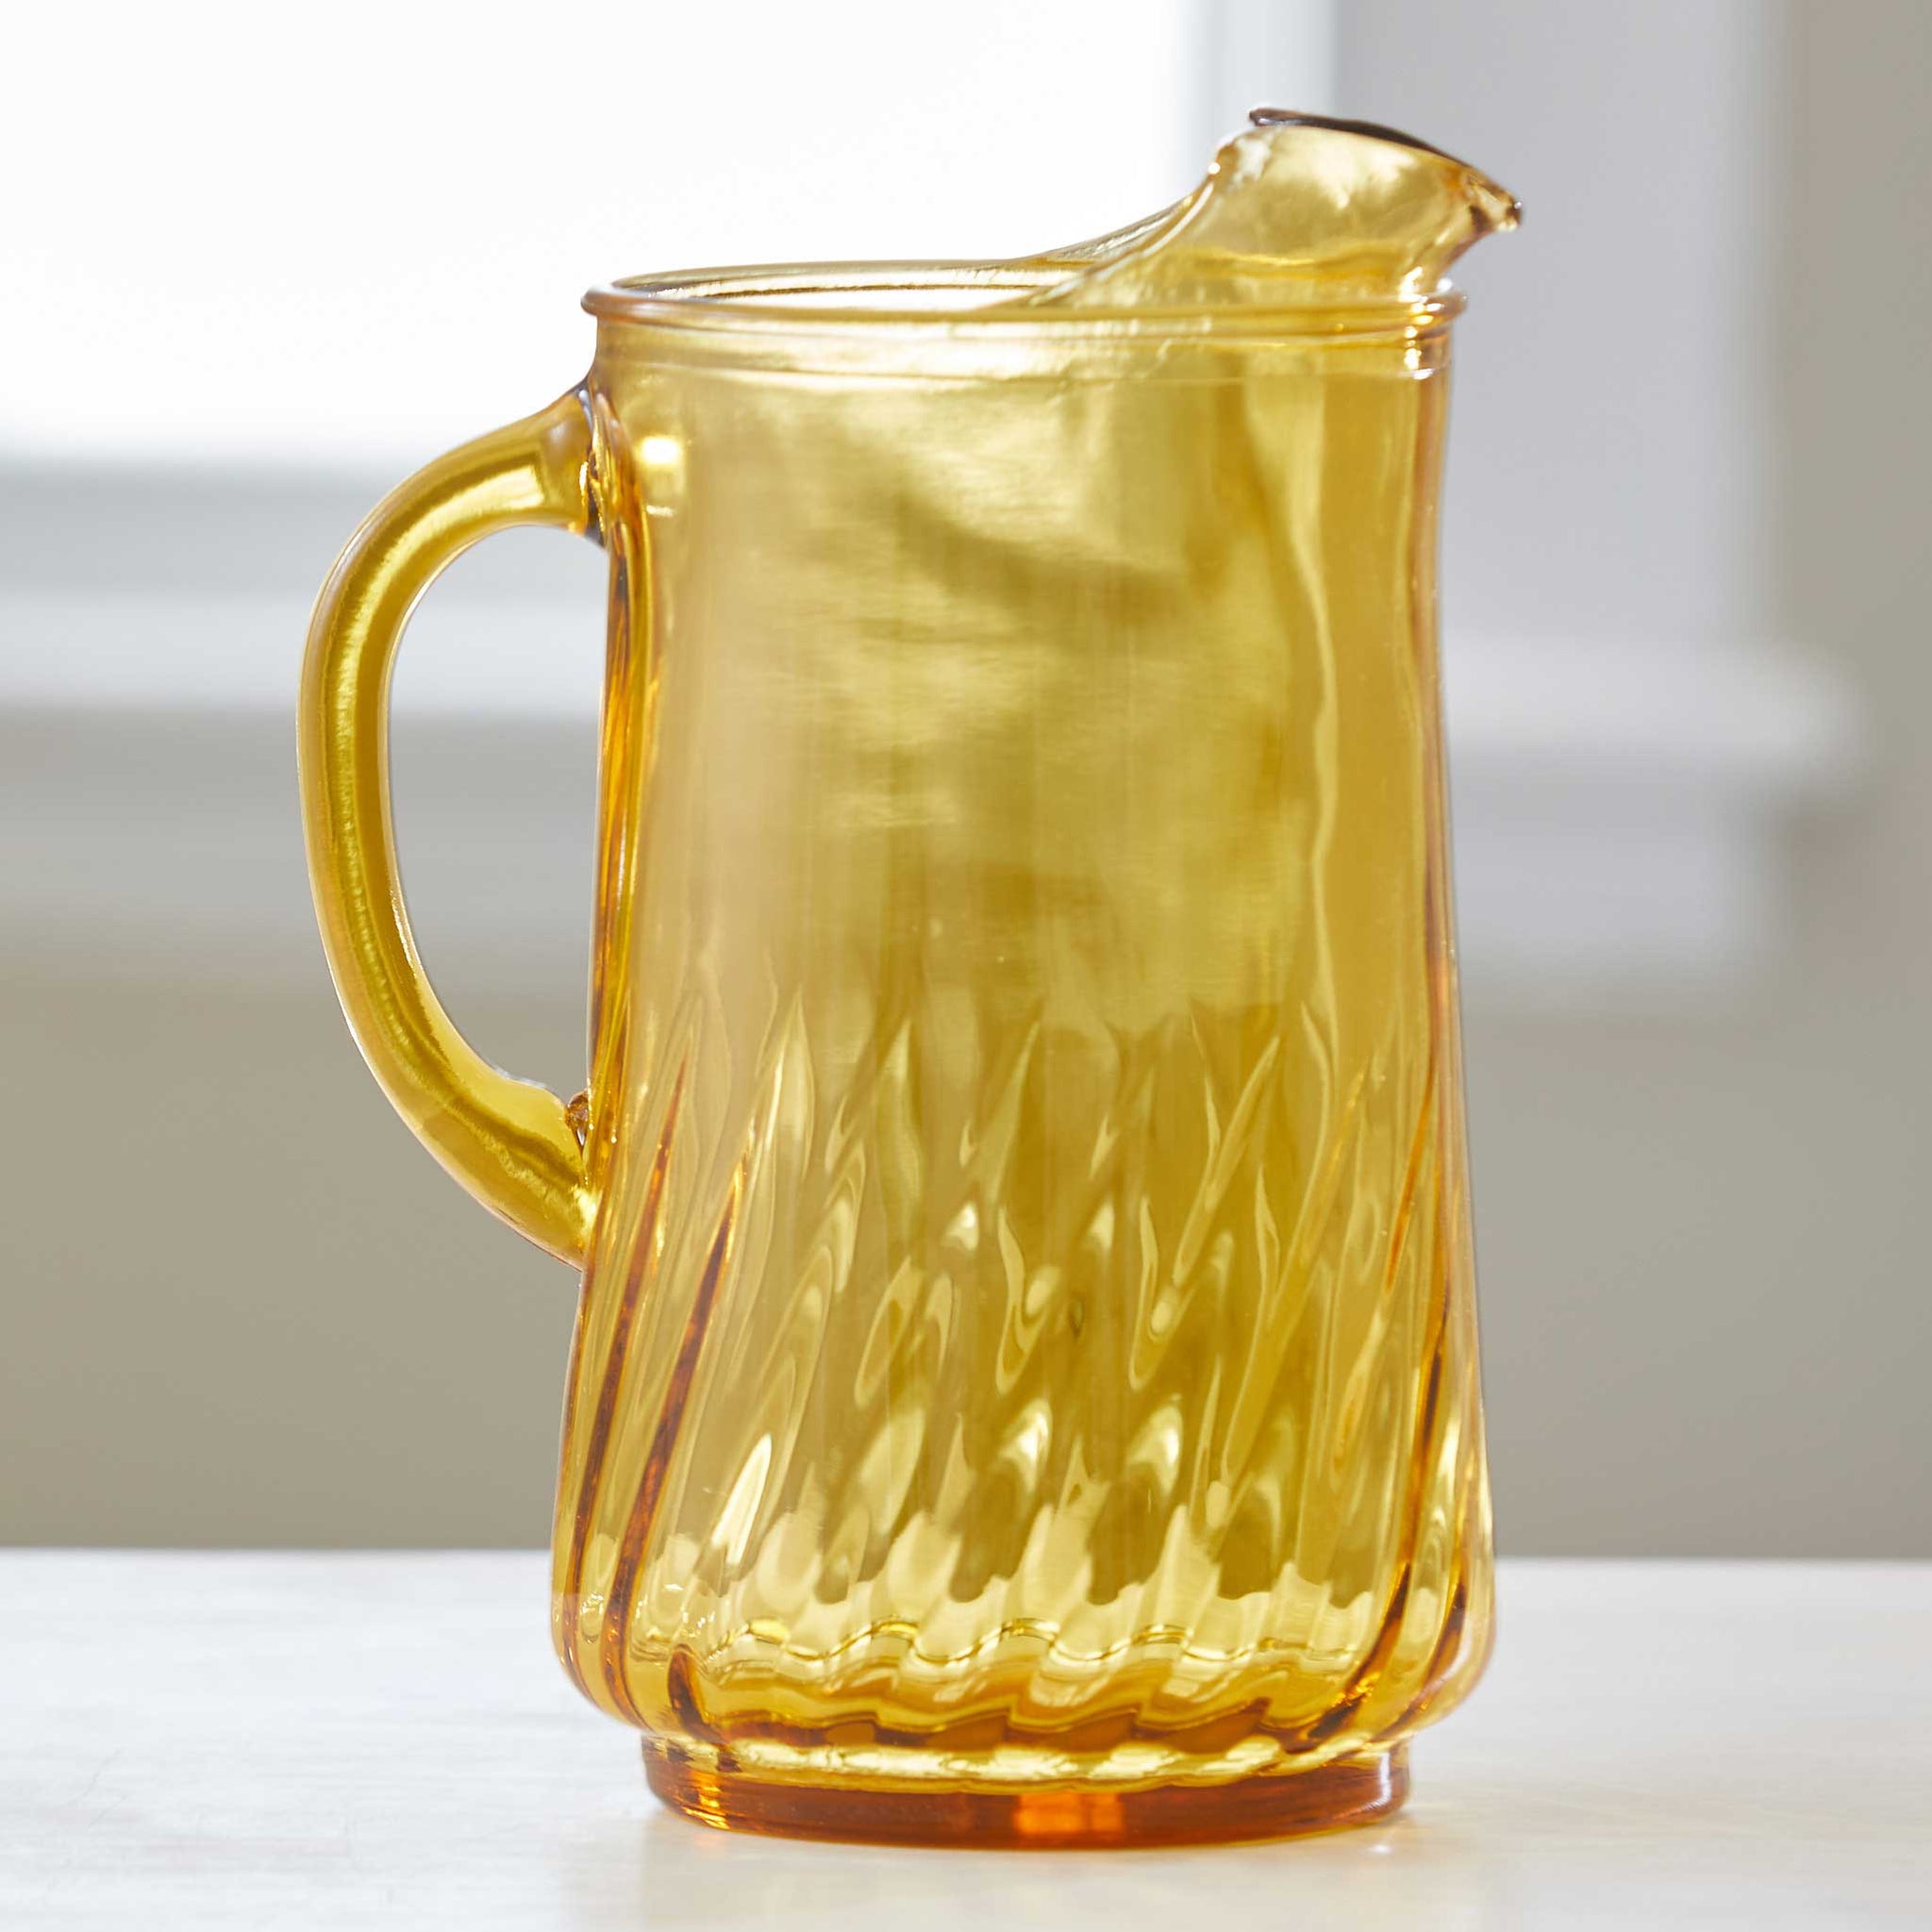 Vintage Amber Glass Pitcher with Floral Pattern Design 1/2 Gallon Capacity  10